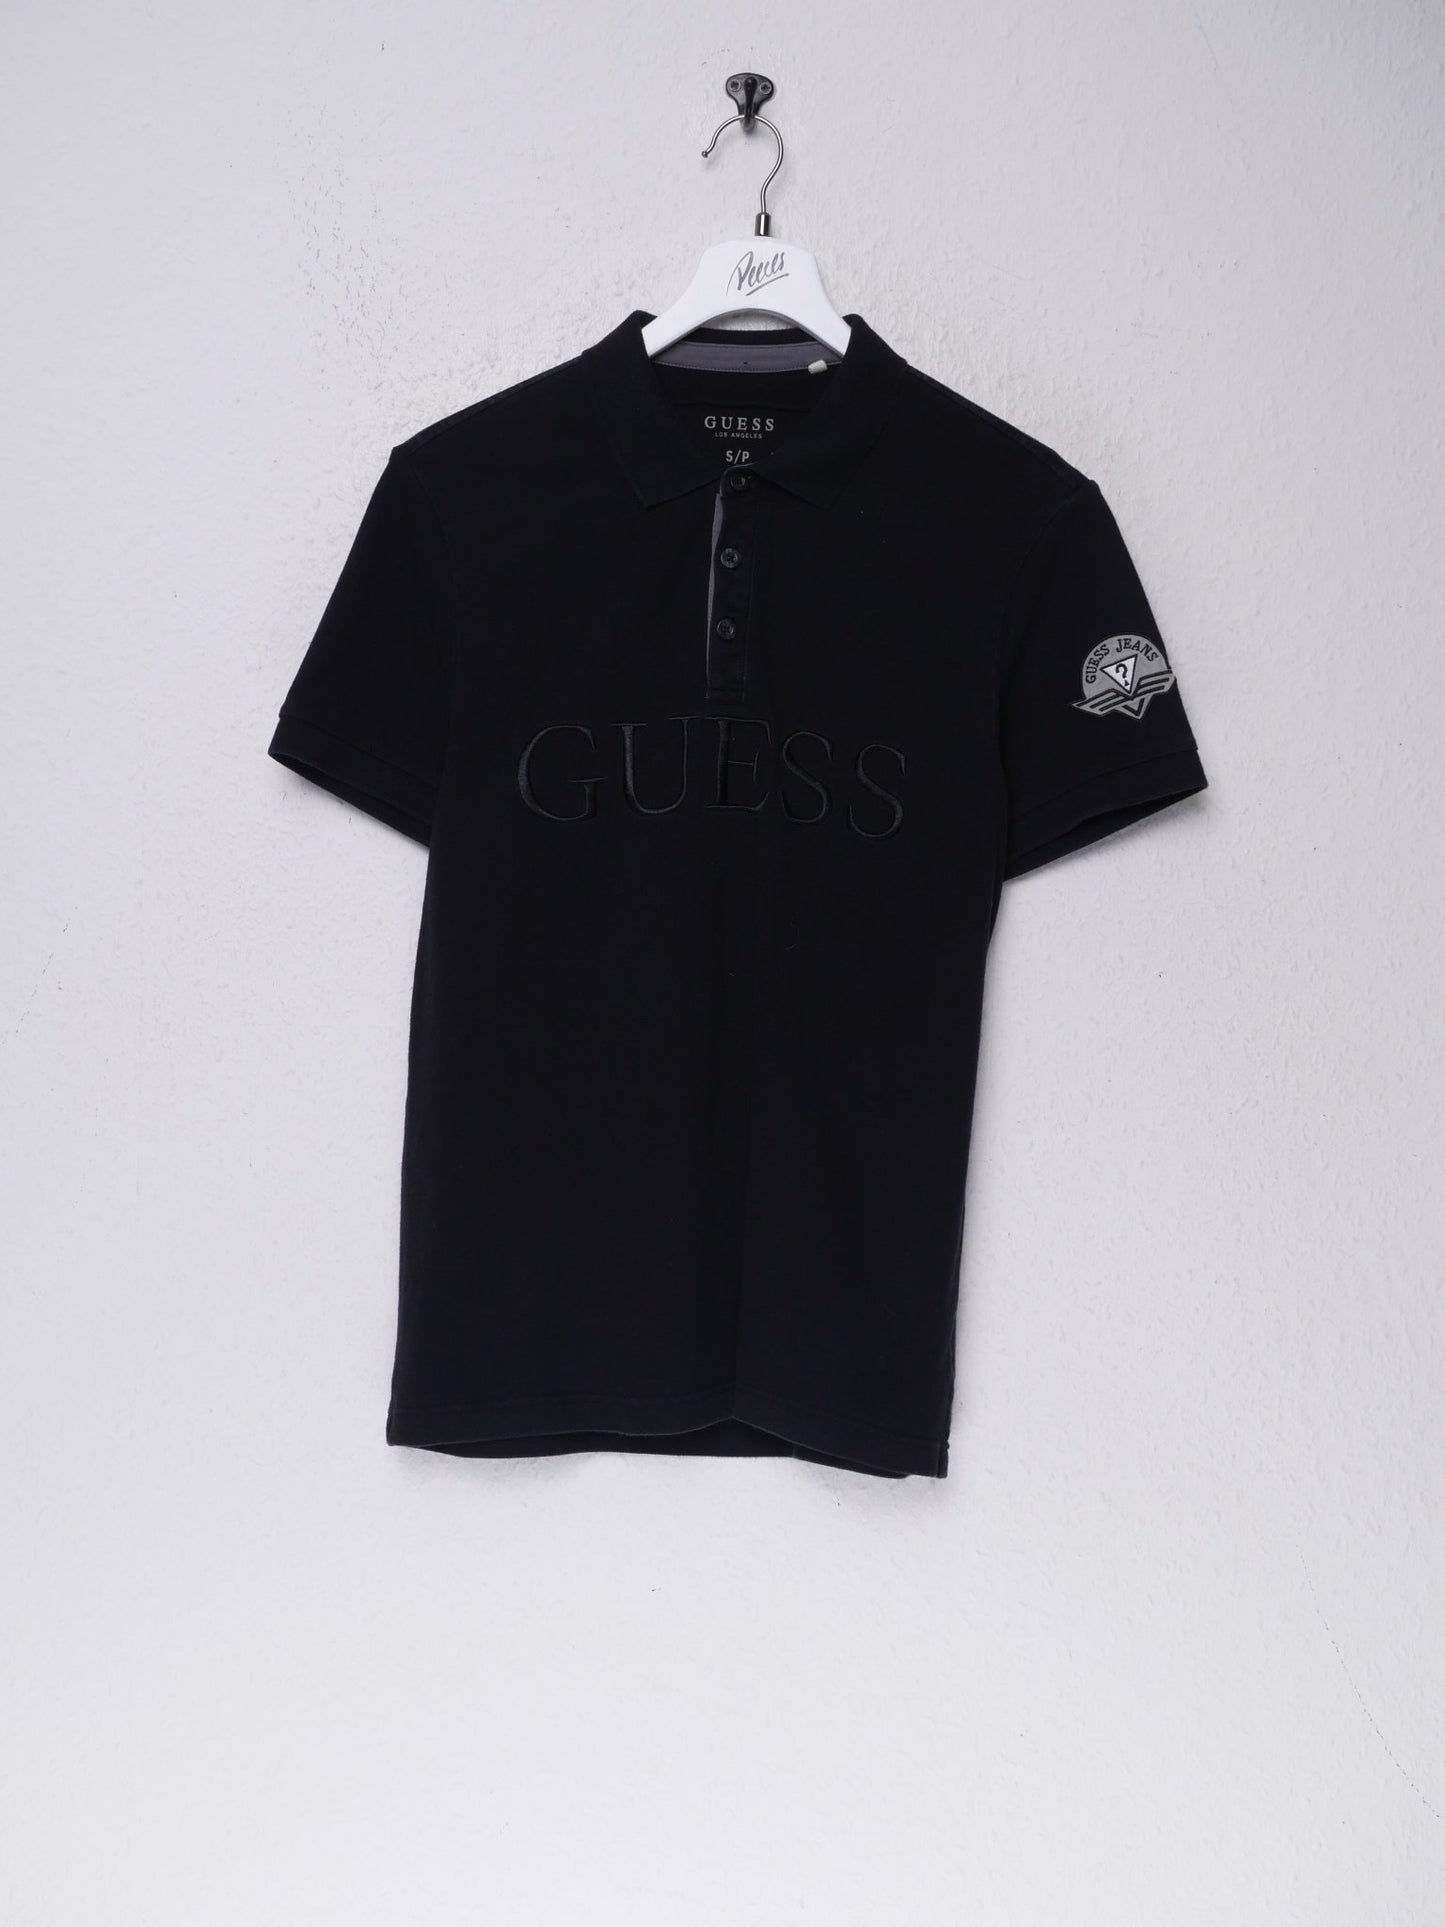 Guess embroidered Spellout black Polo Shirt - Peeces